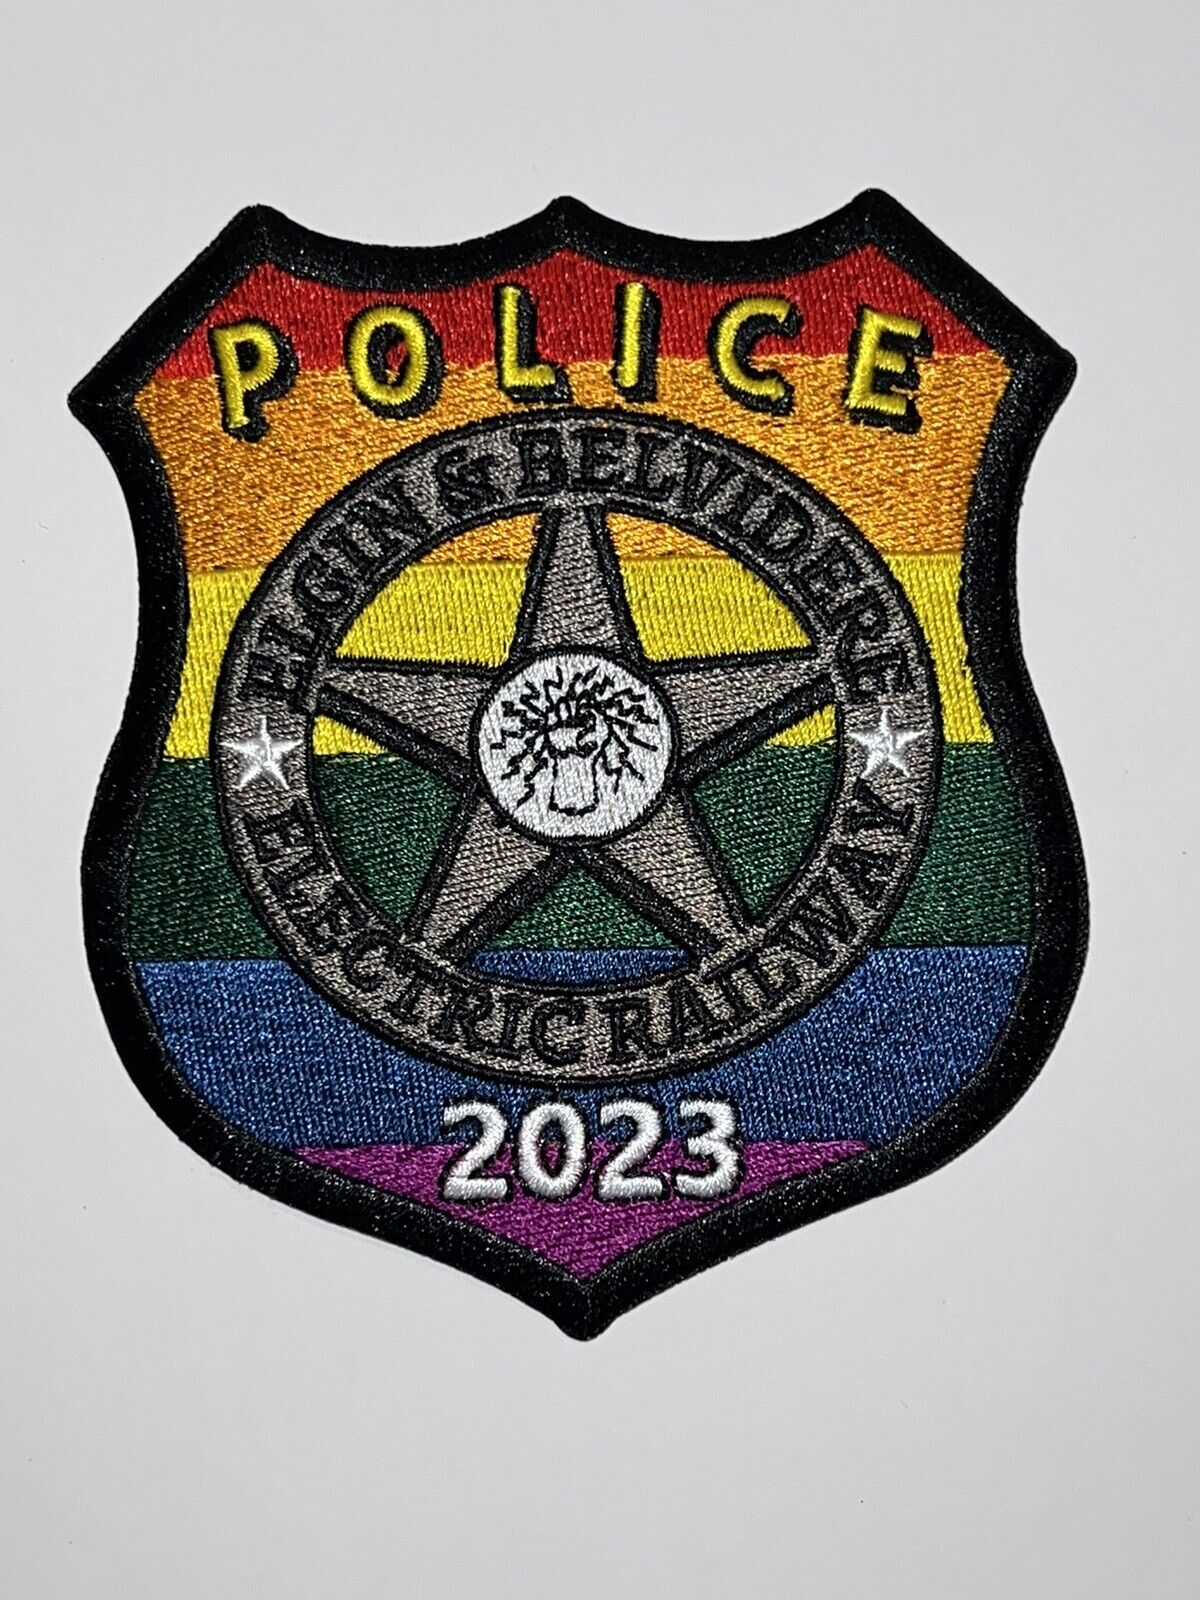 ELGIN & BELVIDERE ELECTRIC RAILWAY 2023 GAY PRIDE POLICE PATCH ILLINOIS TRANSIT